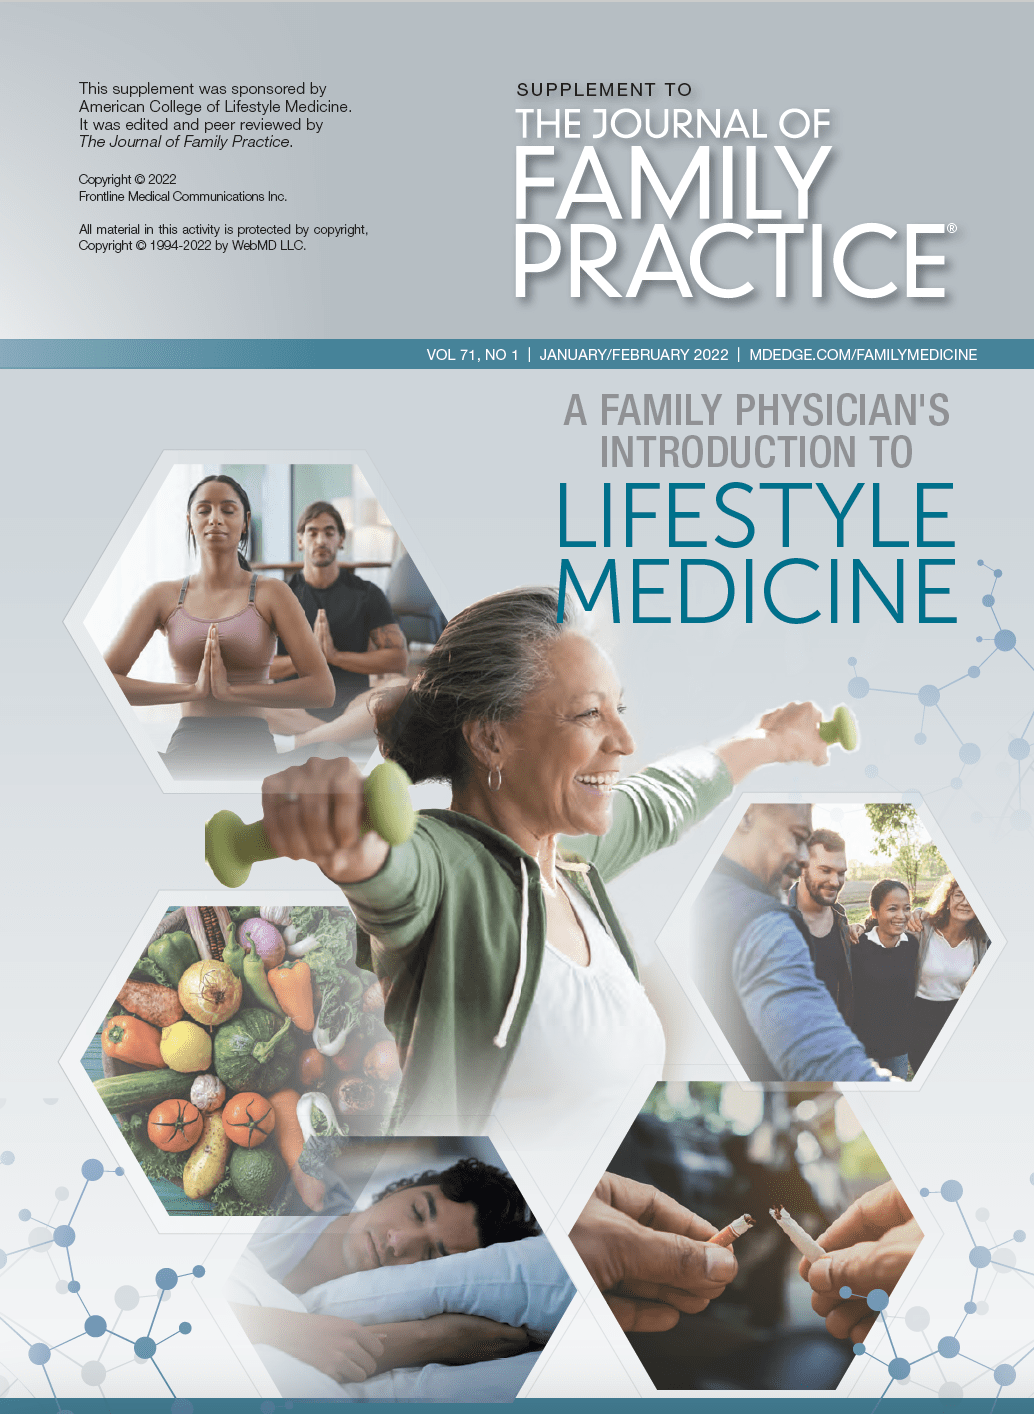 LM Supplement Journal of Family Practice ACLM